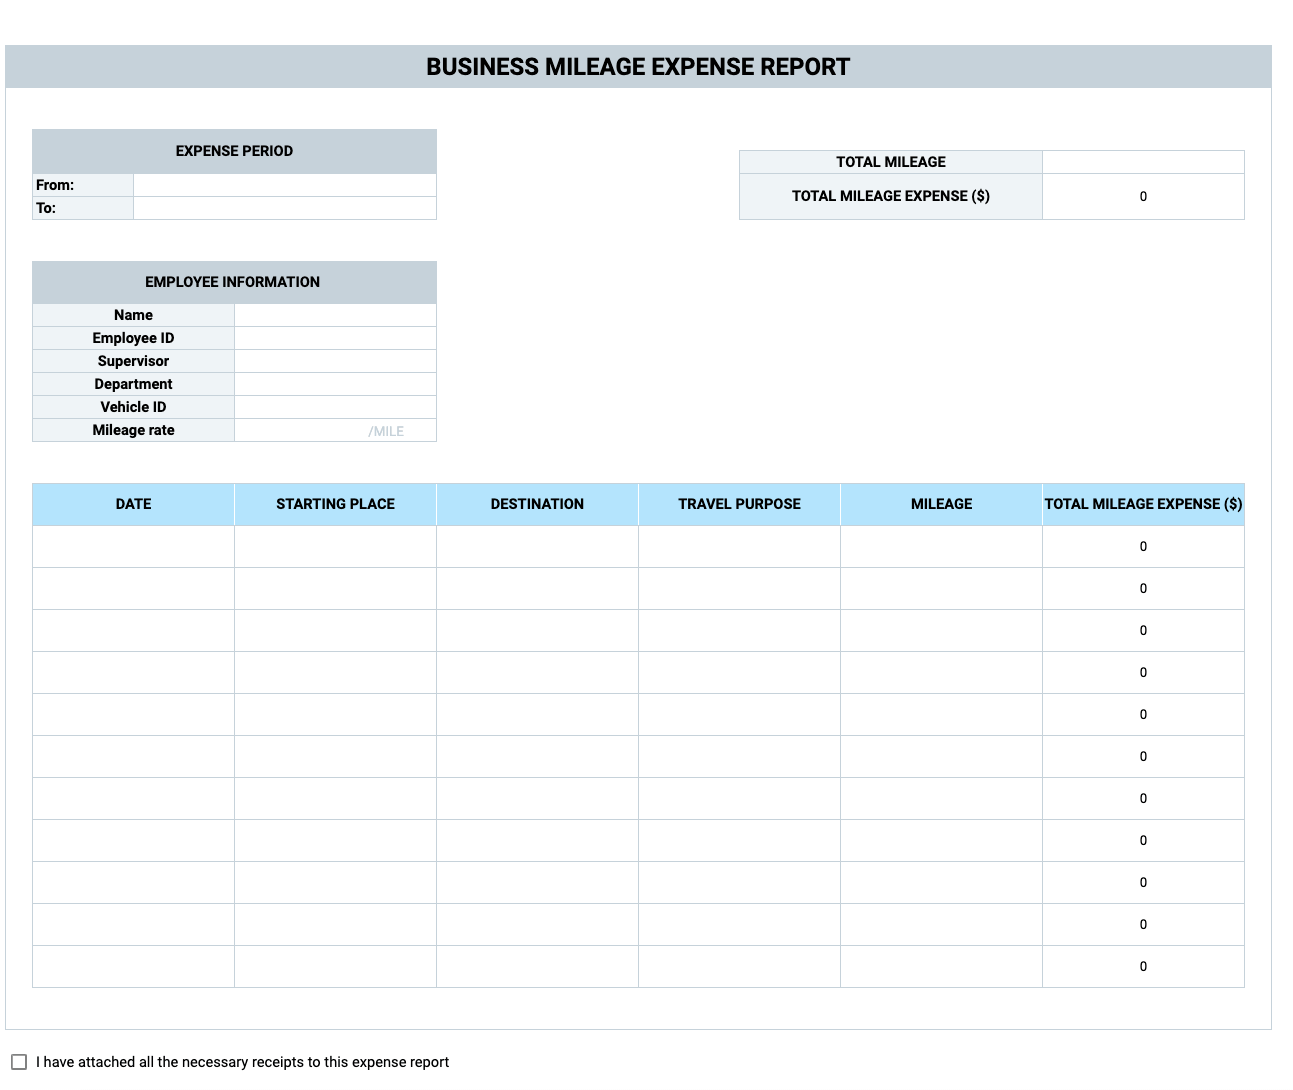 Preview of the Business Mileage Expense Report Template